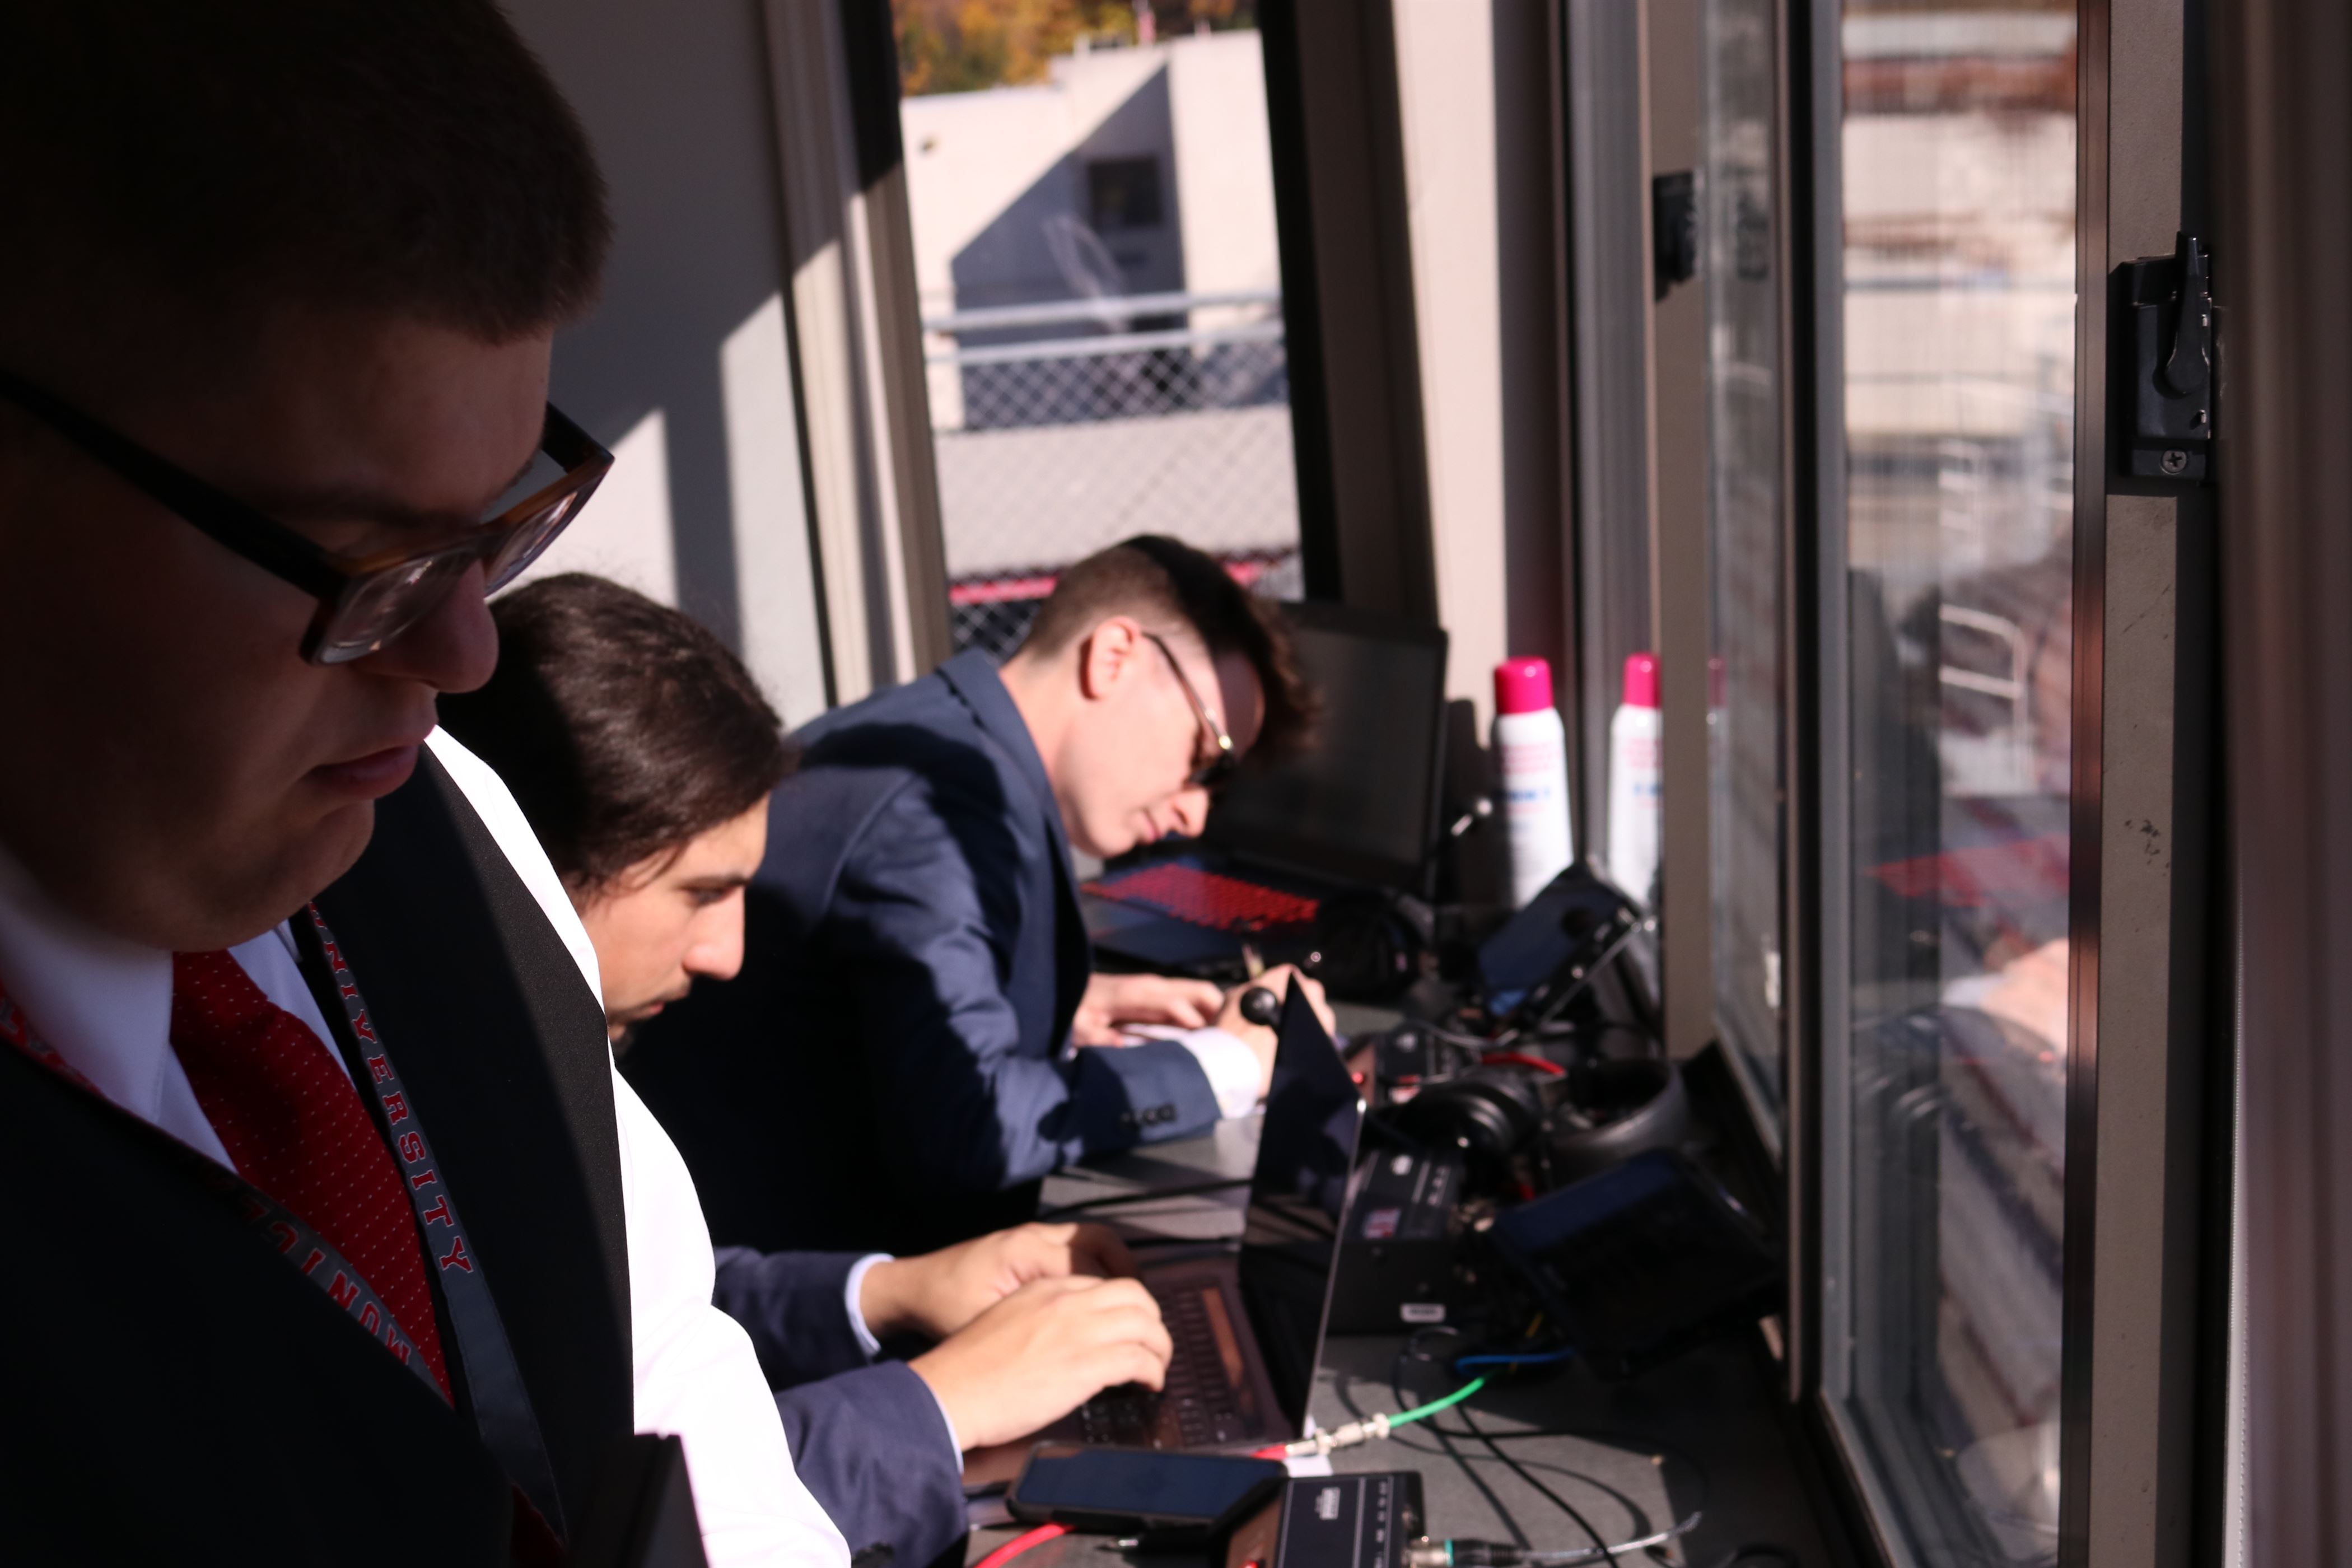 Commentators Campbell Donovan (close left), Anthony Cafone (middle), and Charlie Baduini (right) prepare for the football game. Photo courtesy of Wyatt Lardieri